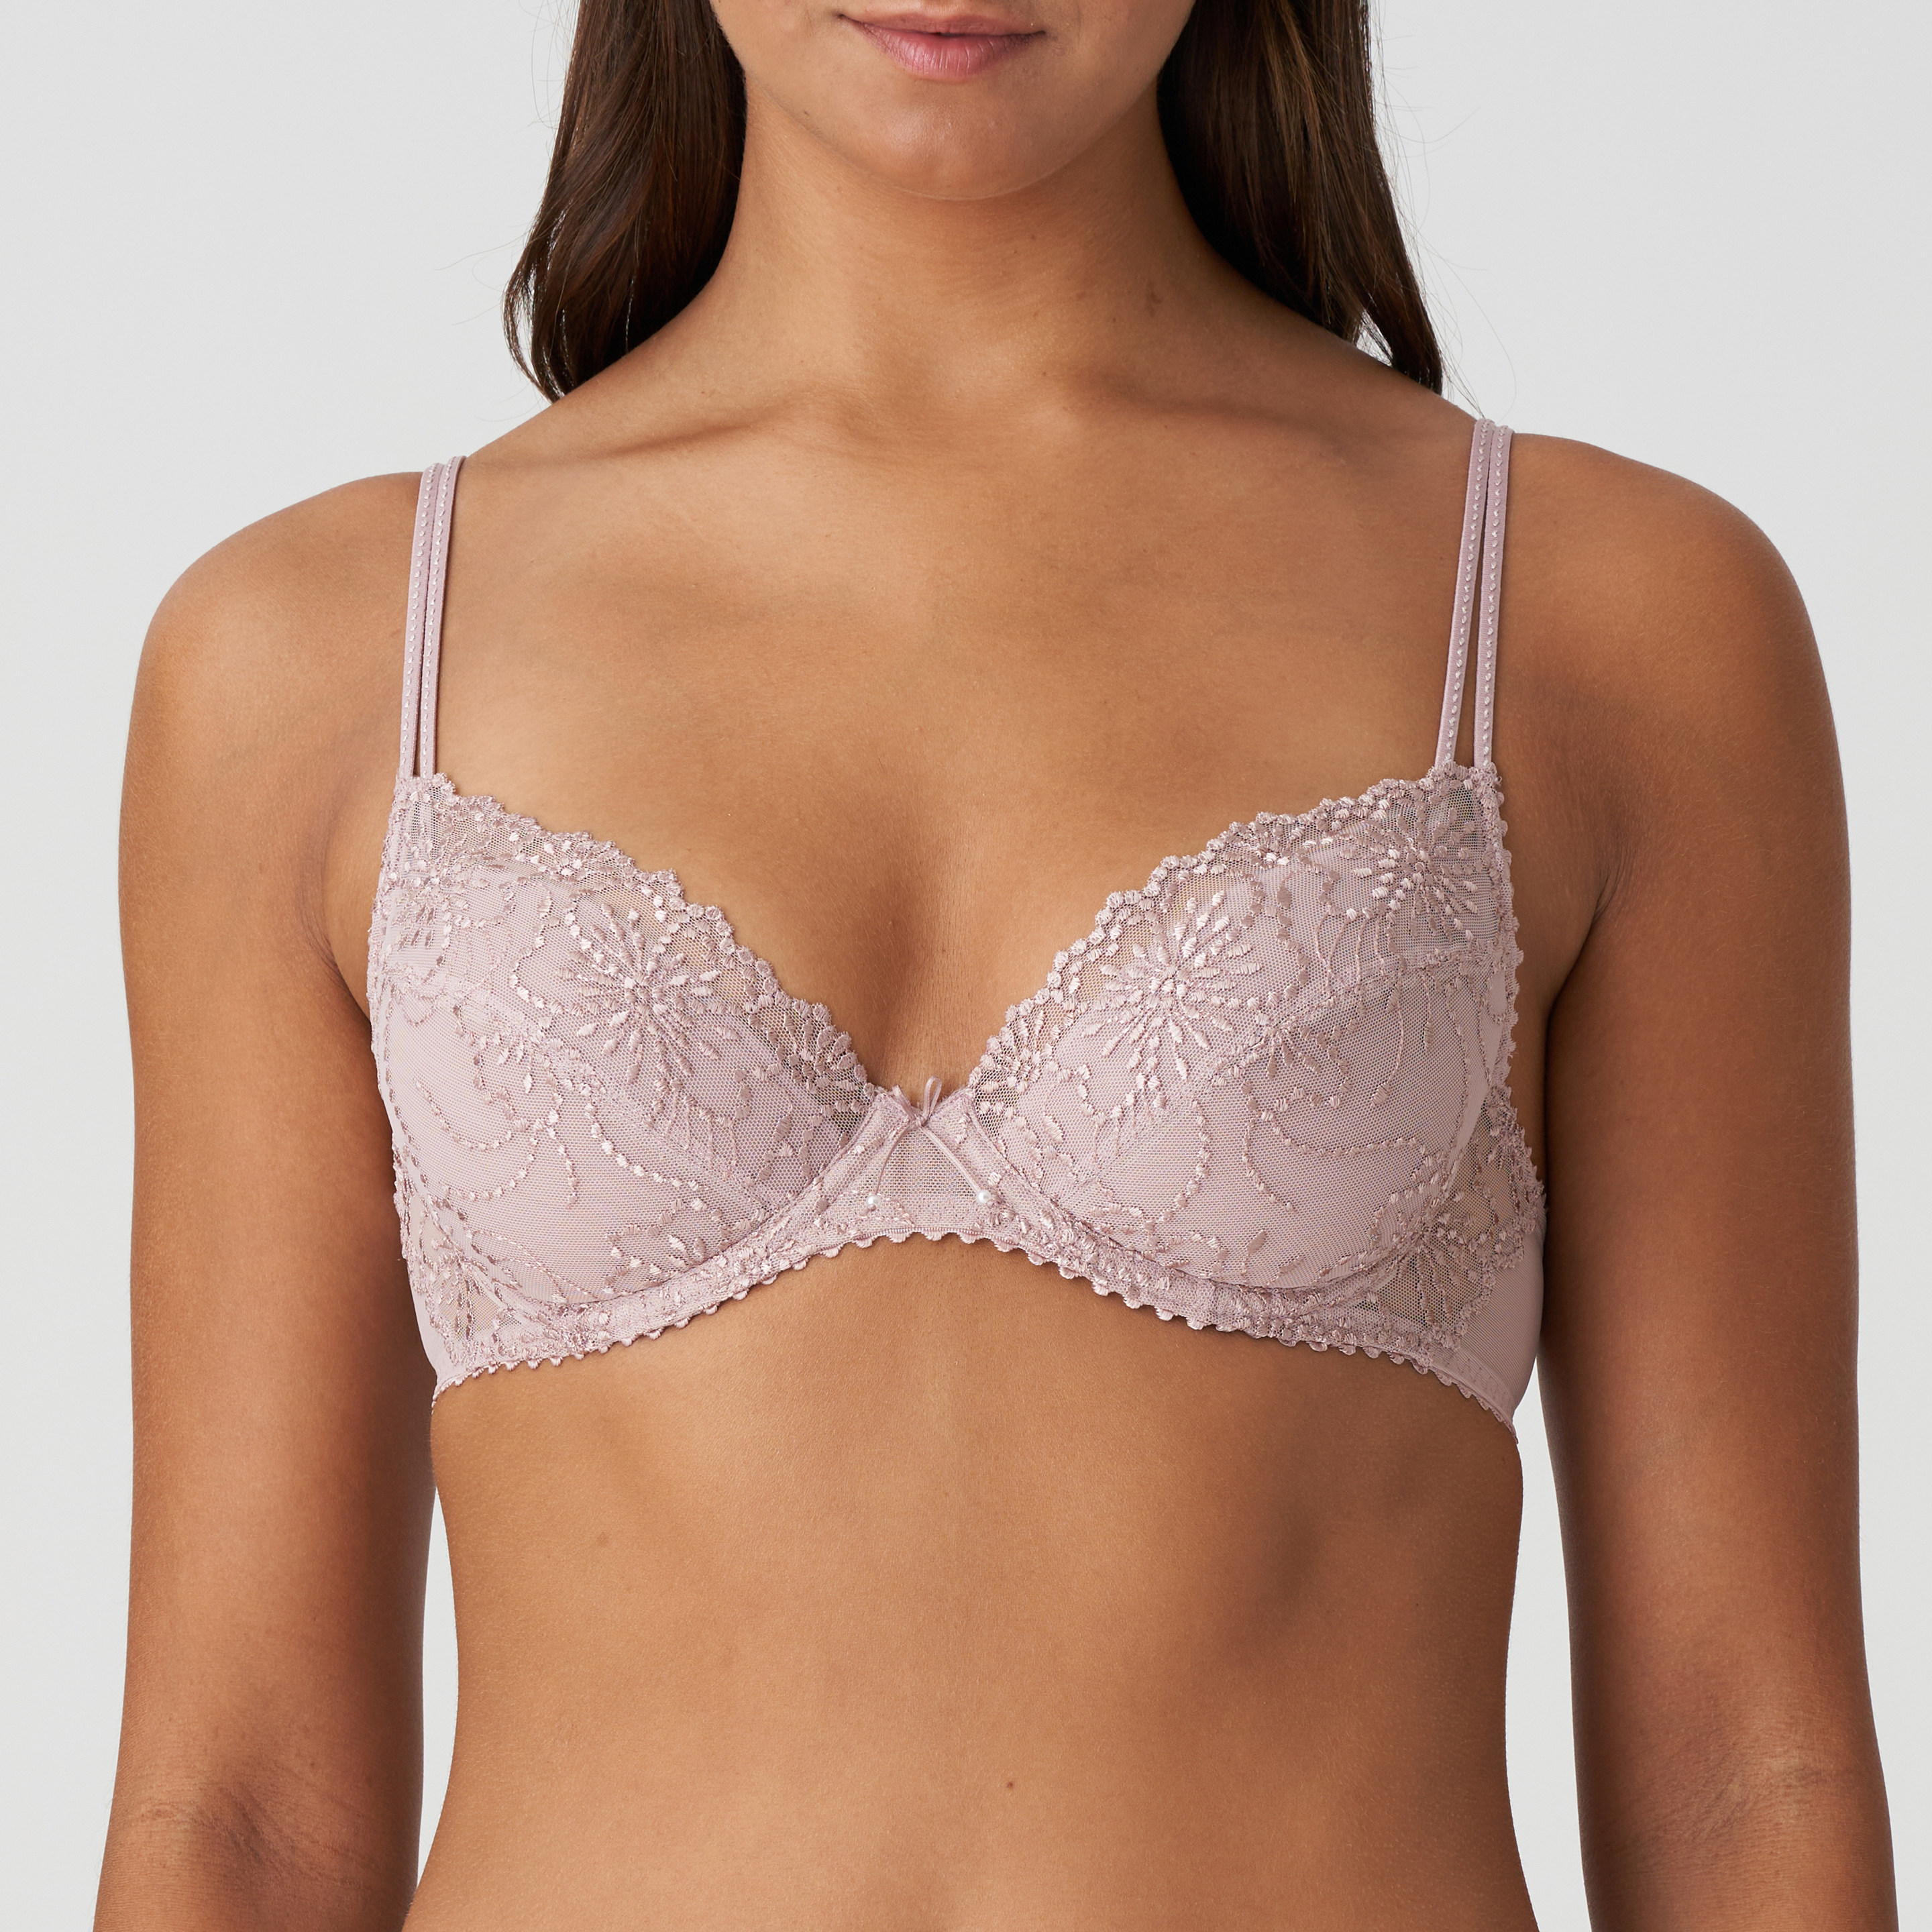 Justharion 3pieces Post Surgery Bra With Removable Pads Soft And